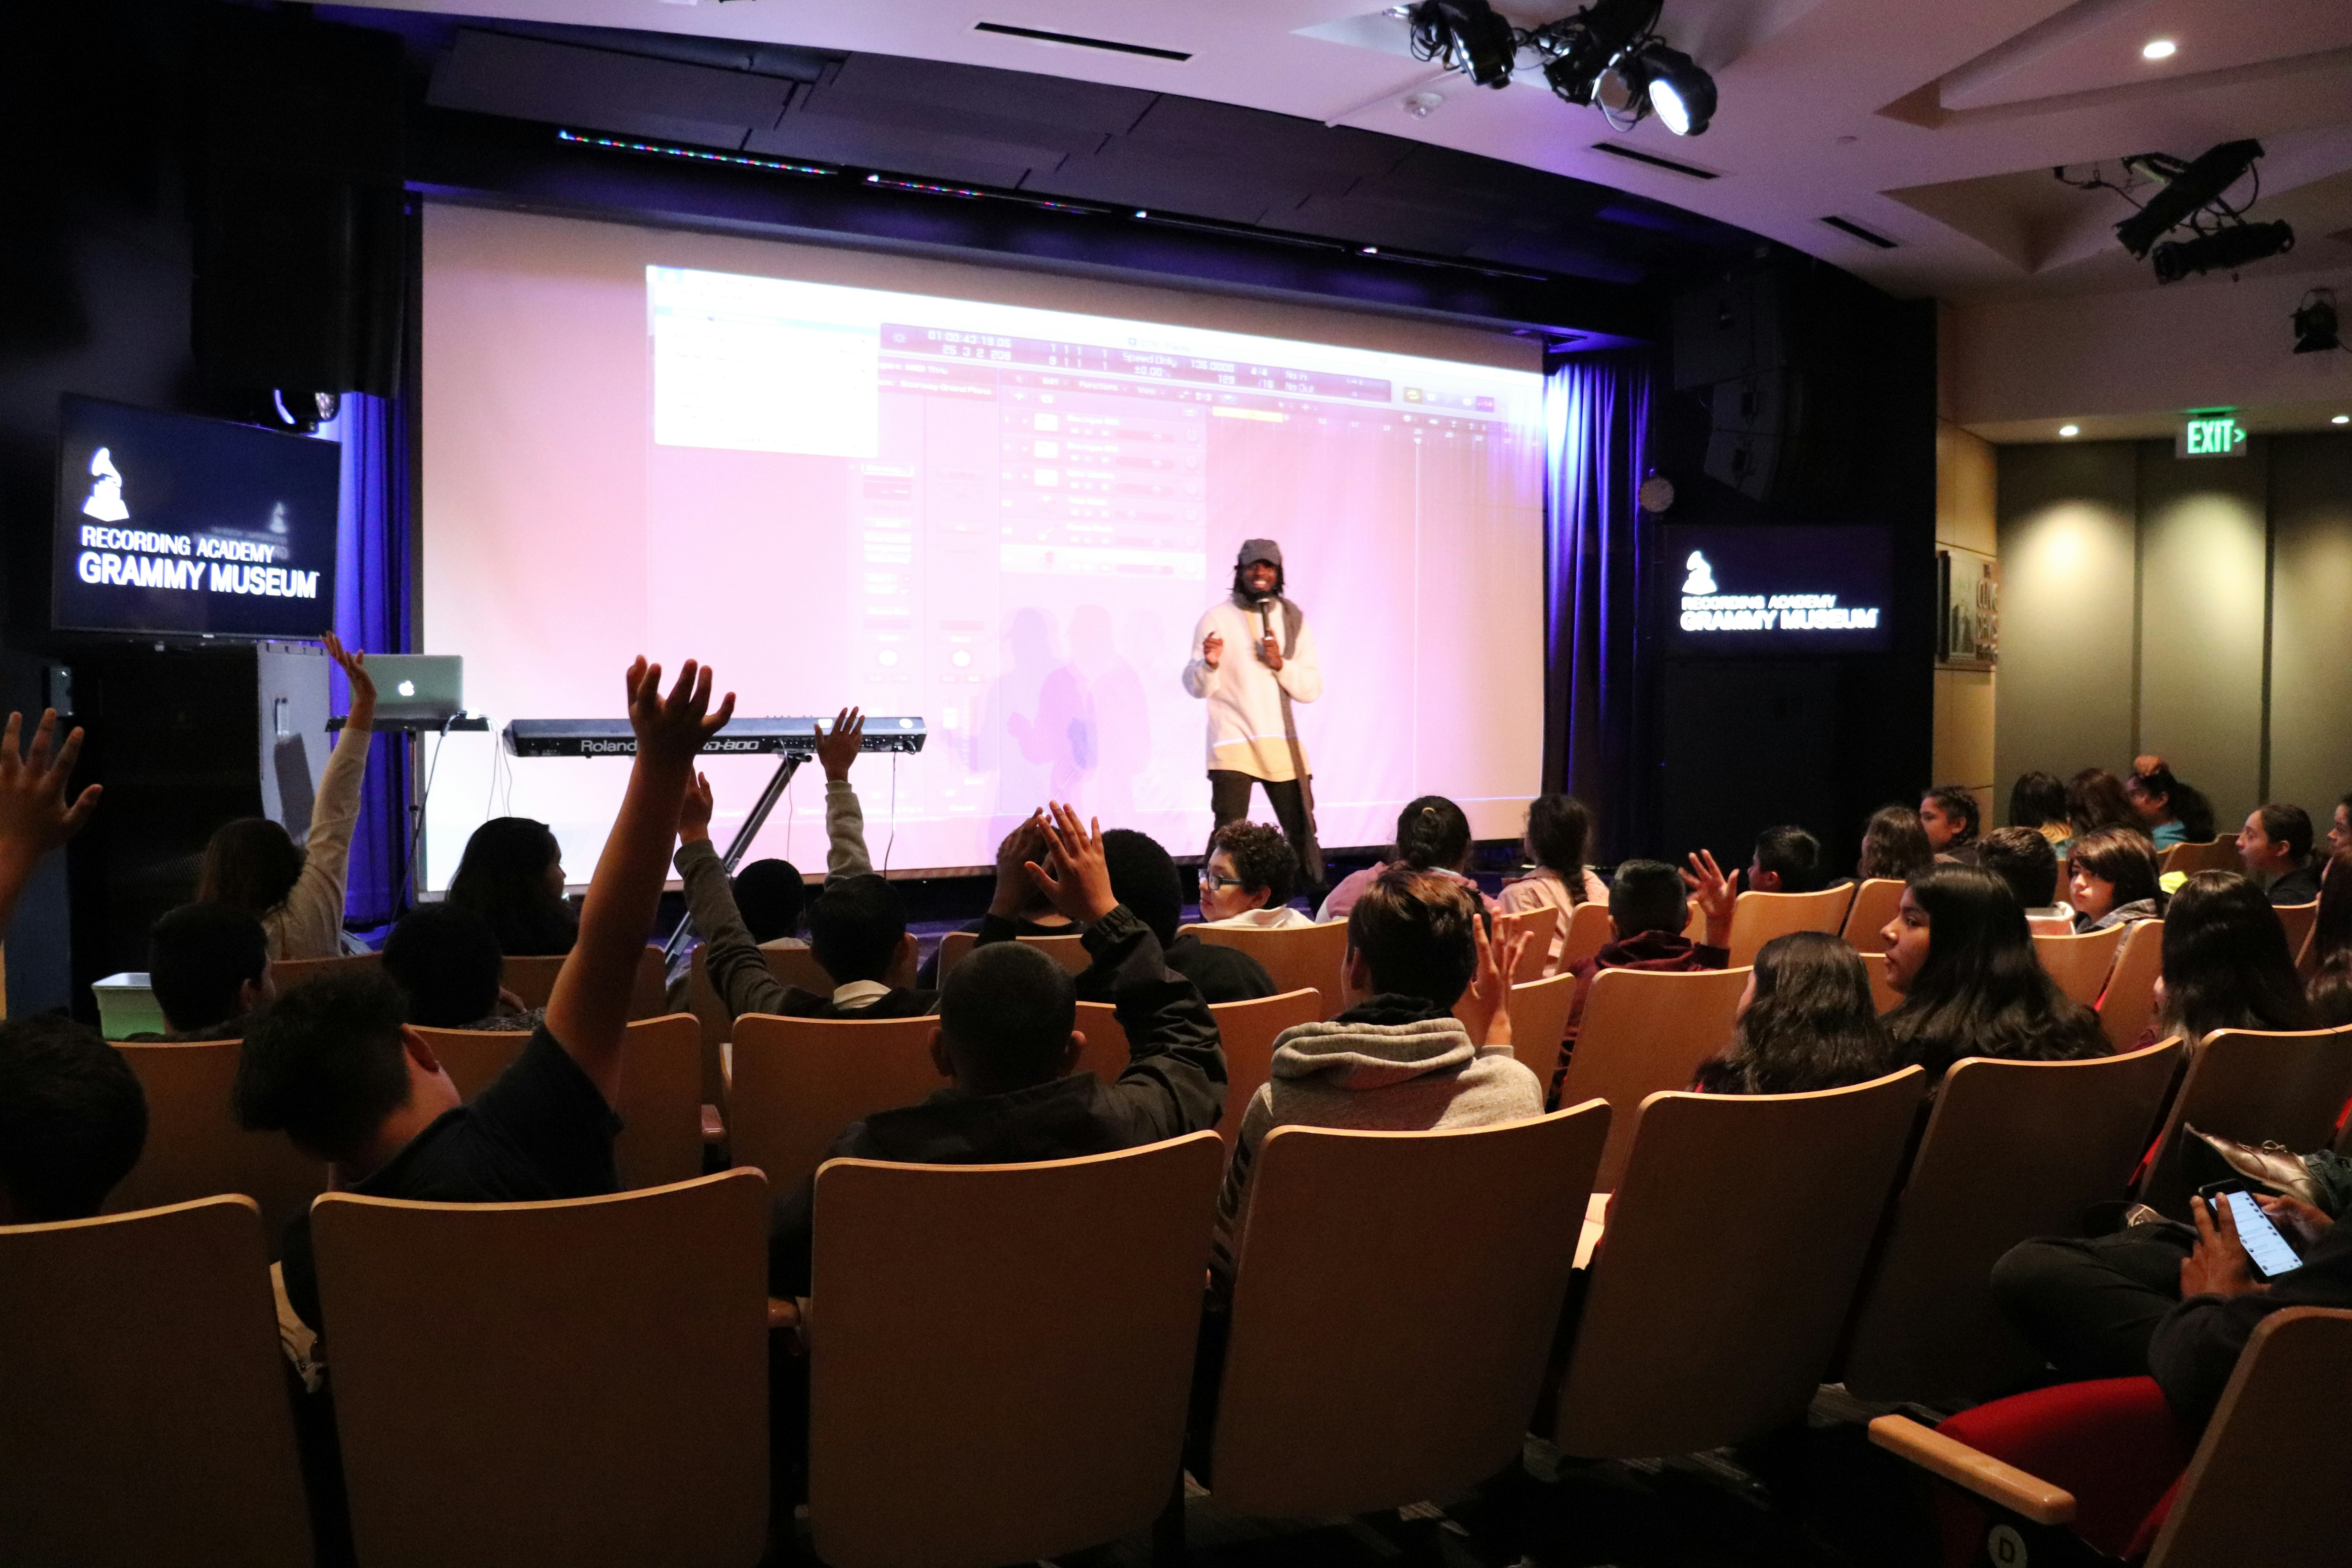 A class at the Grammy Museum, from the perspective of the audience looking at the stage